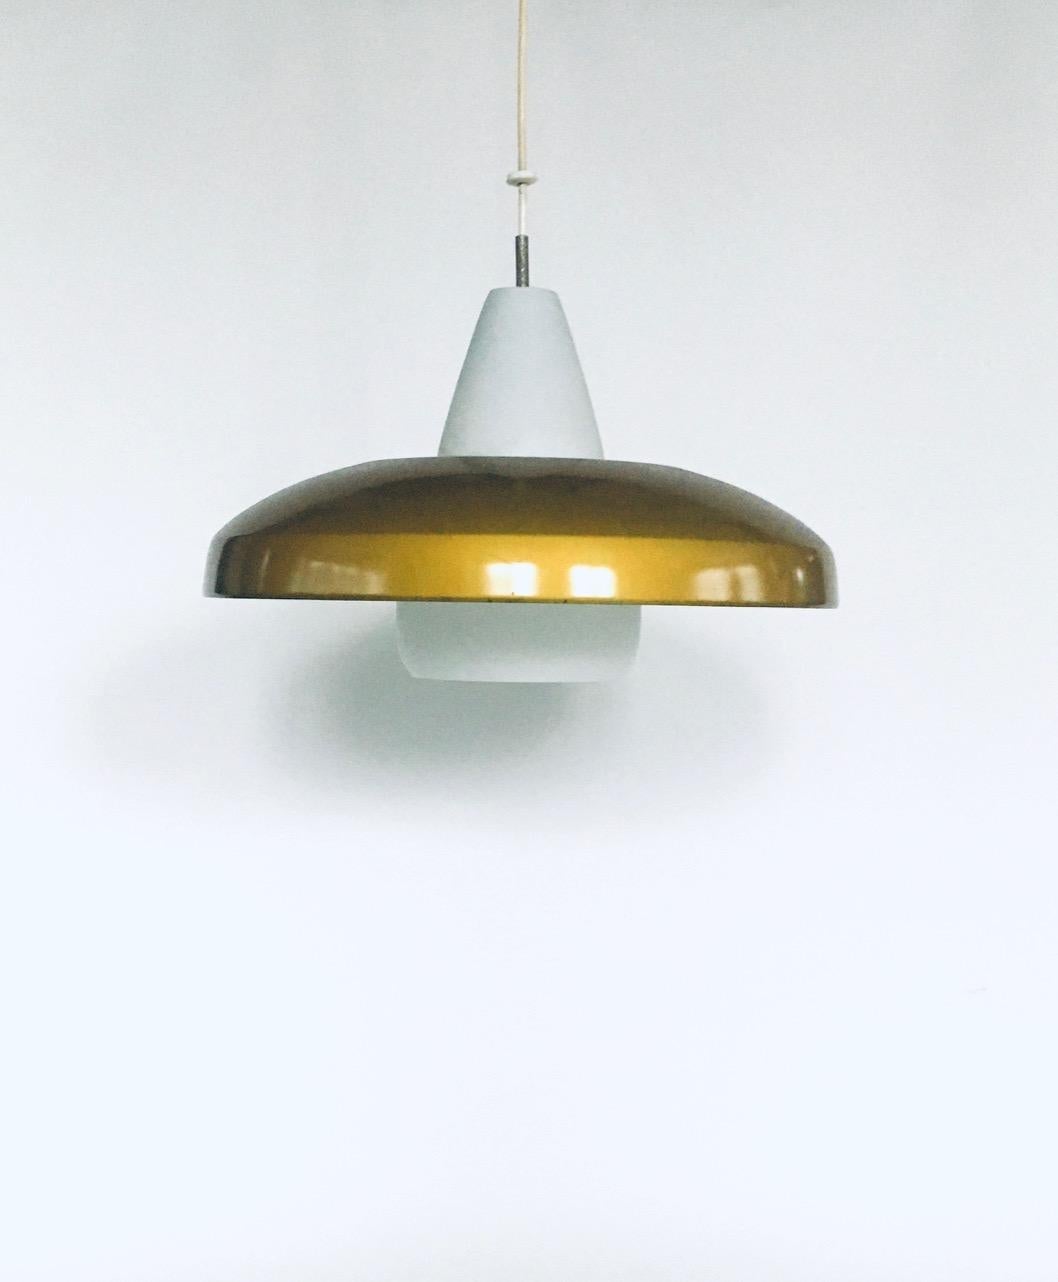 Mid-20th Century Mid-Century Modern Dutch Design Pendant Lamp by Philips, 1950s For Sale